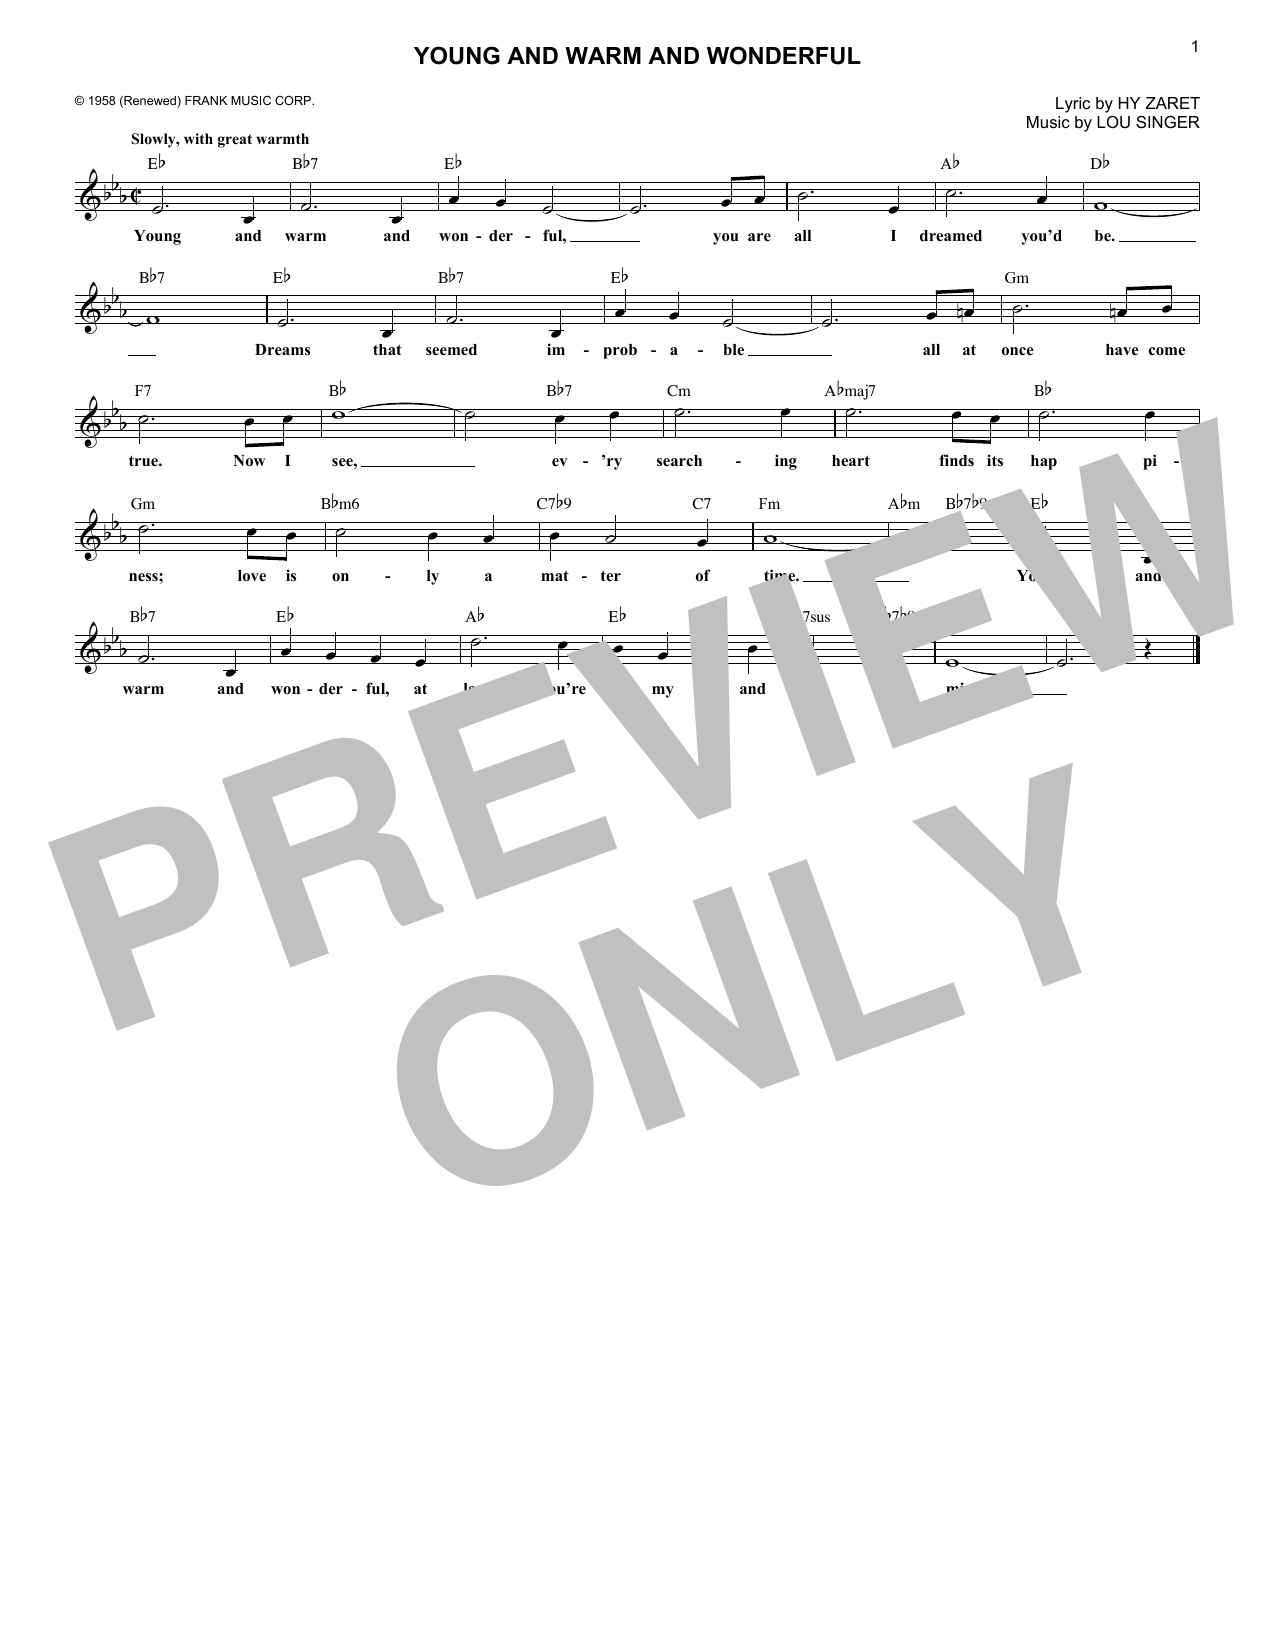 Download Lou Singer Young And Warm And Wonderful Sheet Music